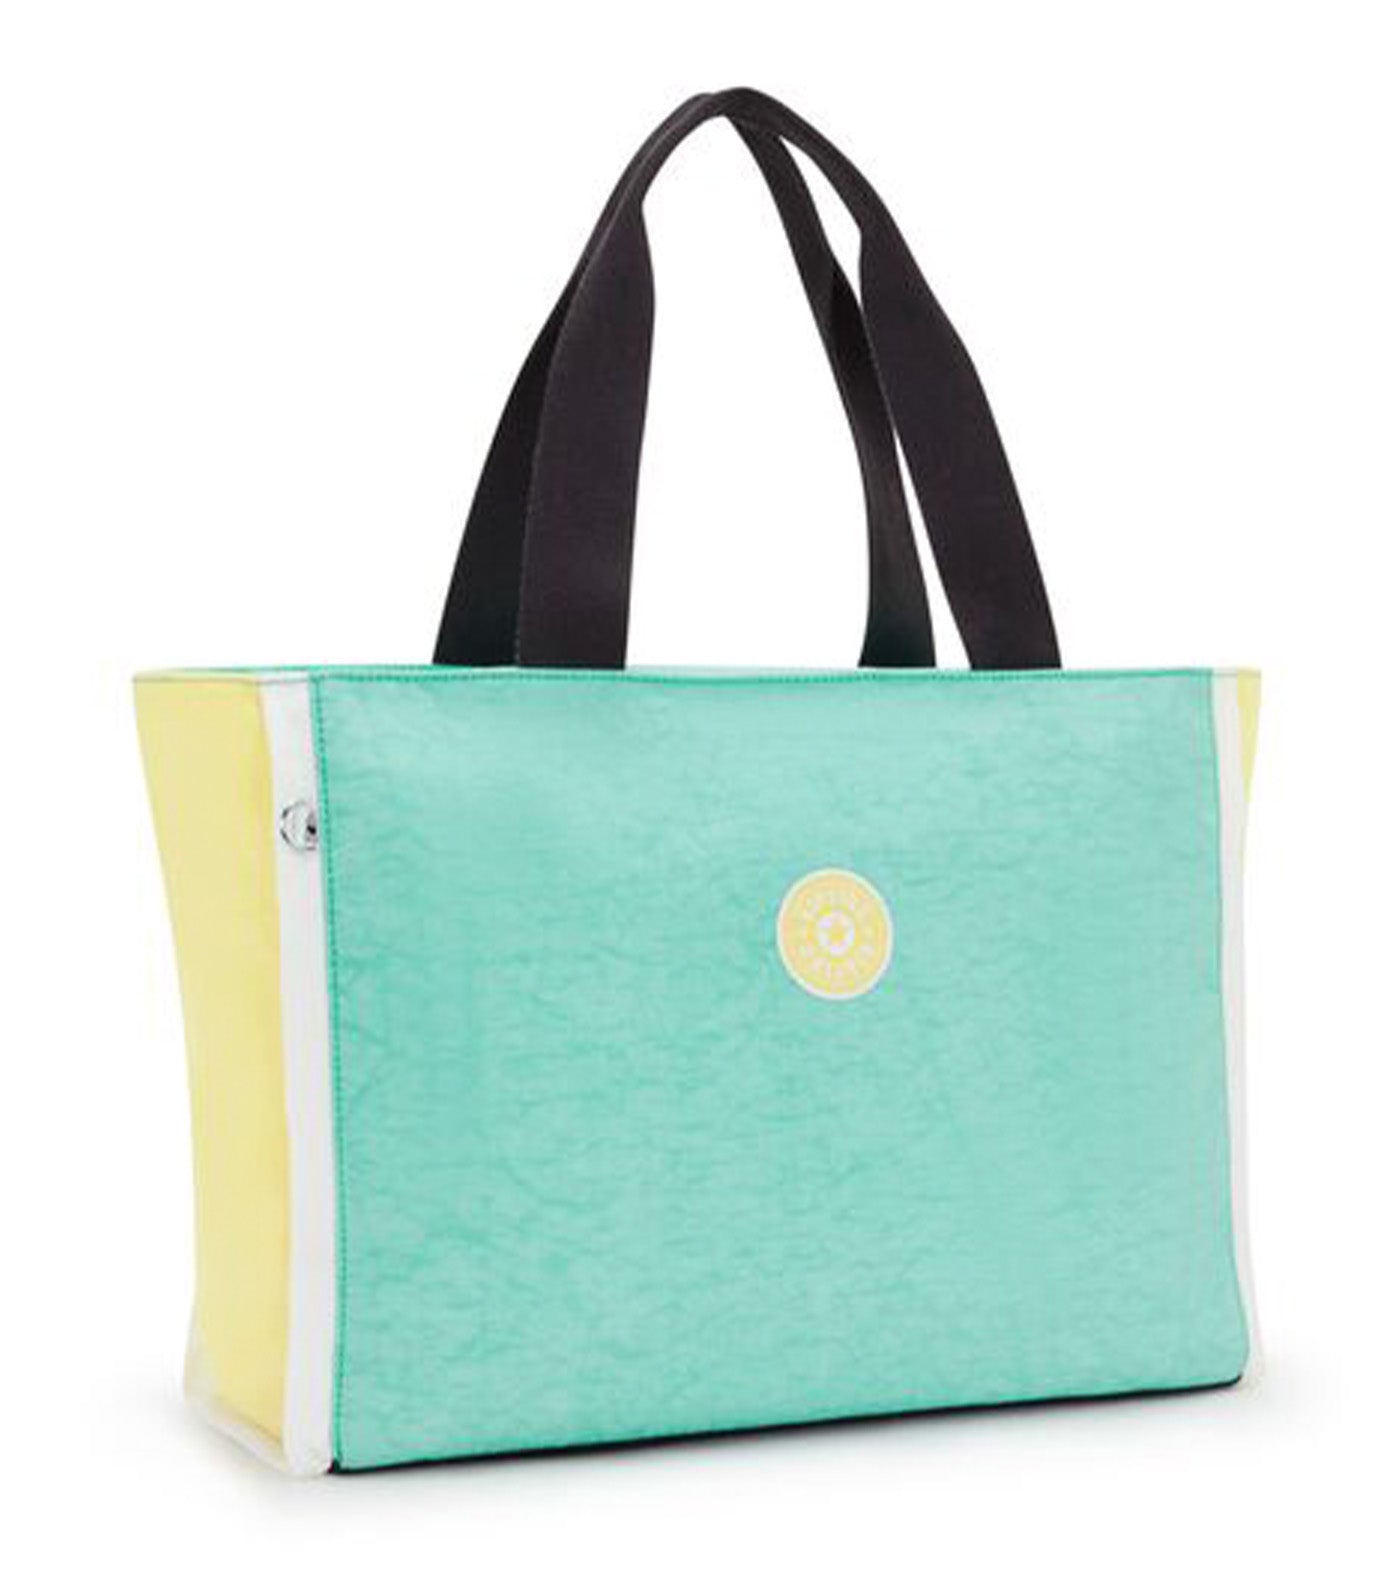 Nalo Tote Bag Lively Teal